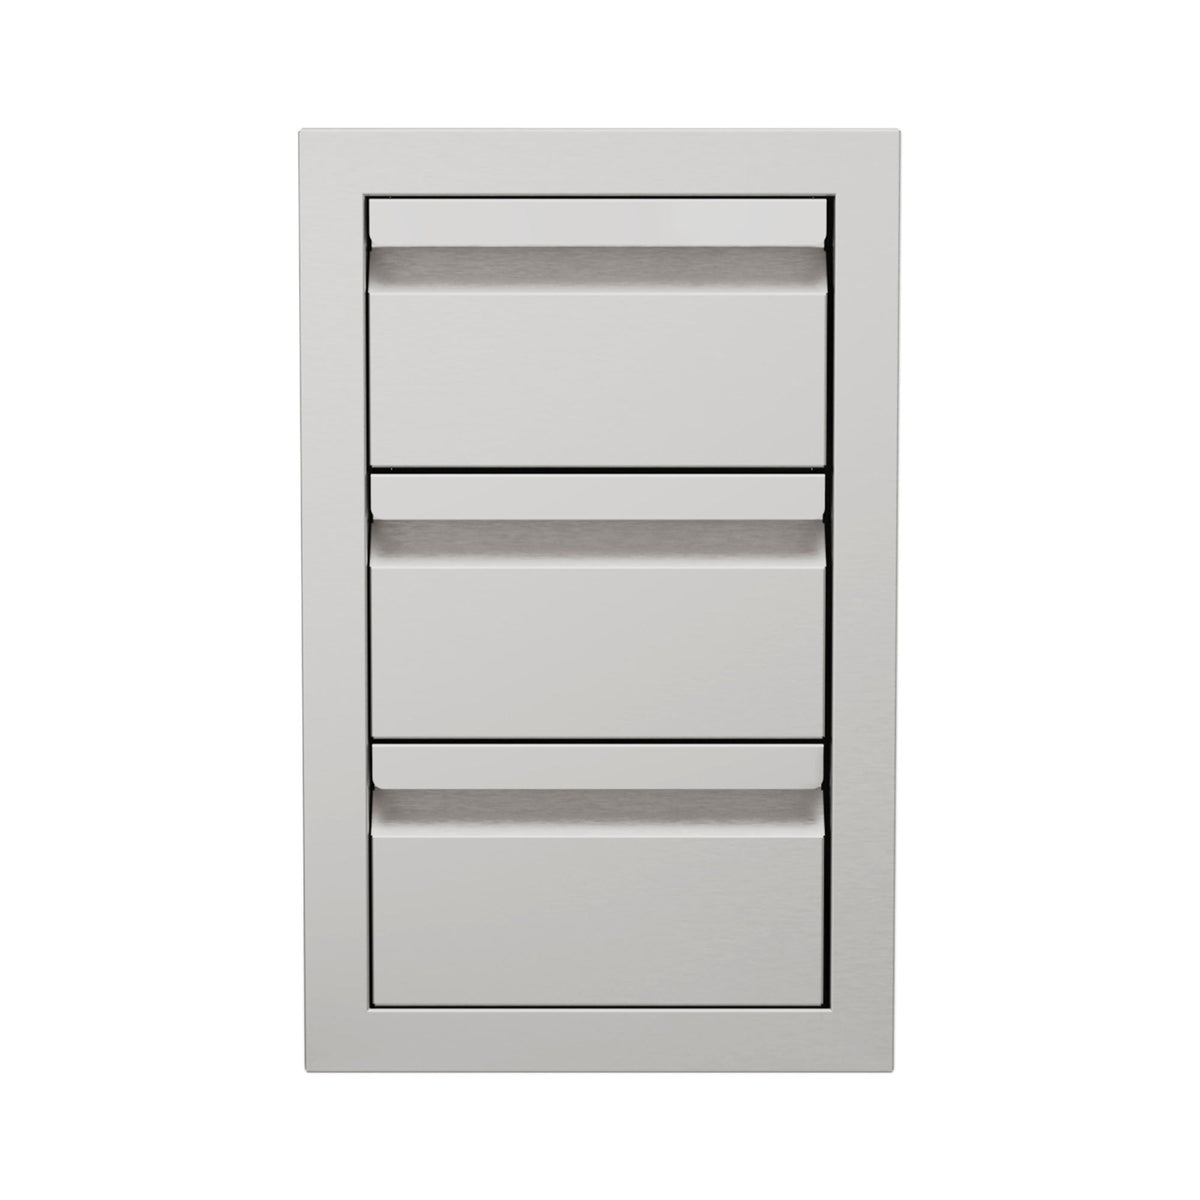 The Outdoor Plus Triple Access Drawers (Commercial Grade 304 Stainless Steel Construction)